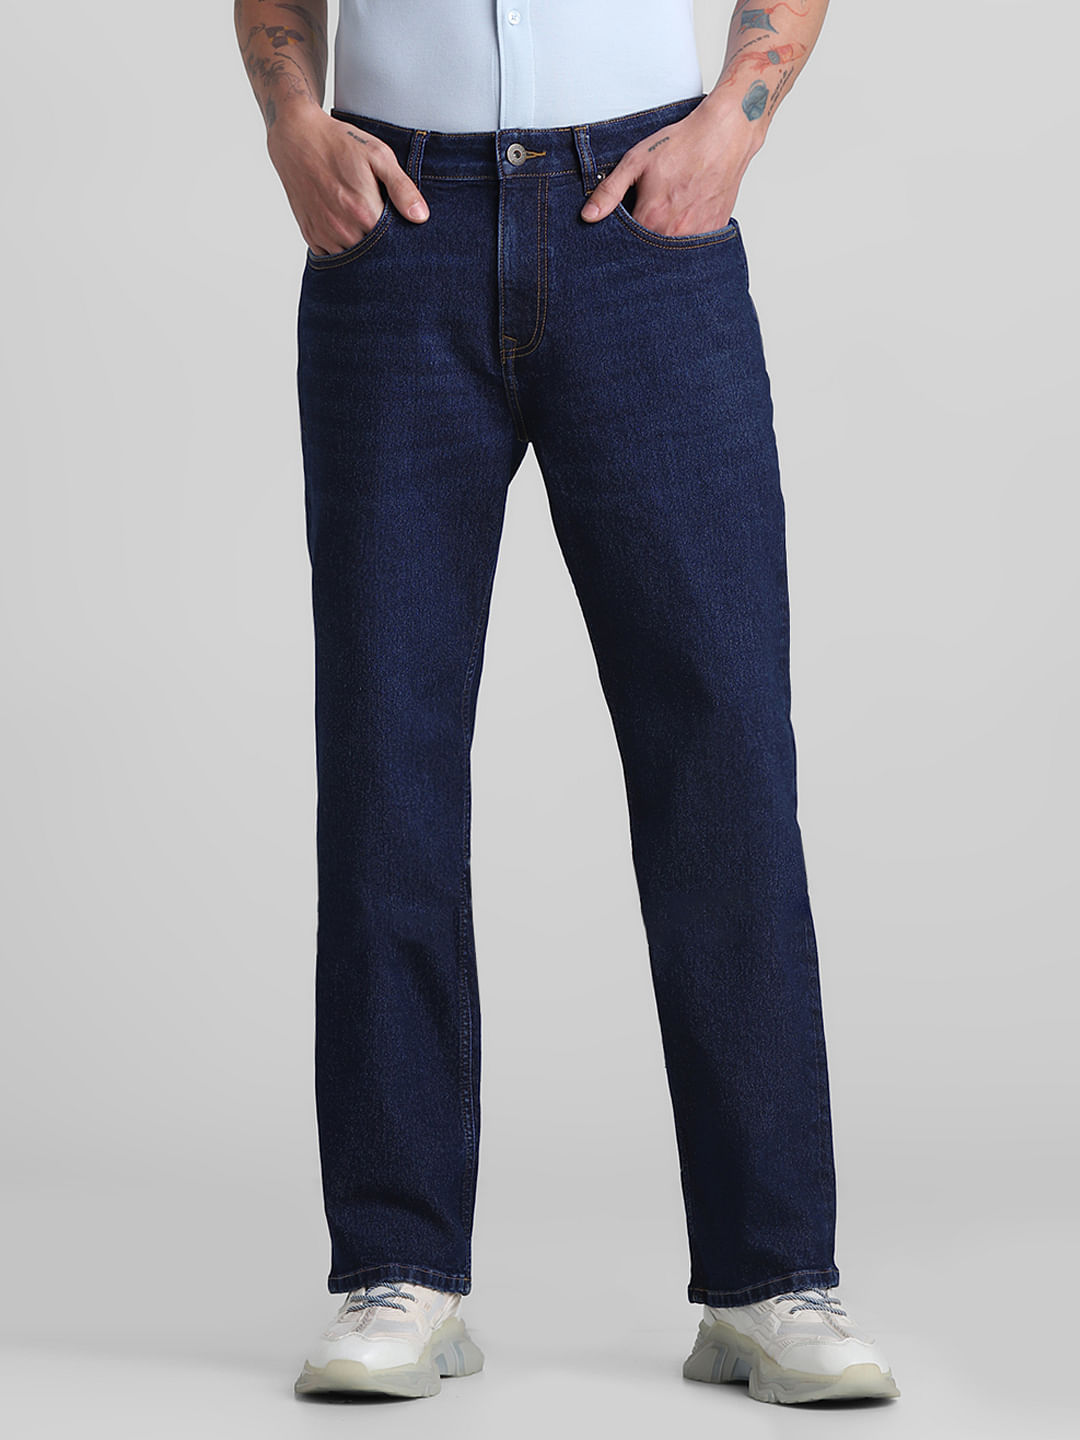 Order Wishker wash High waist skinny fit Denim Jeans Online From Jitthus  Collection